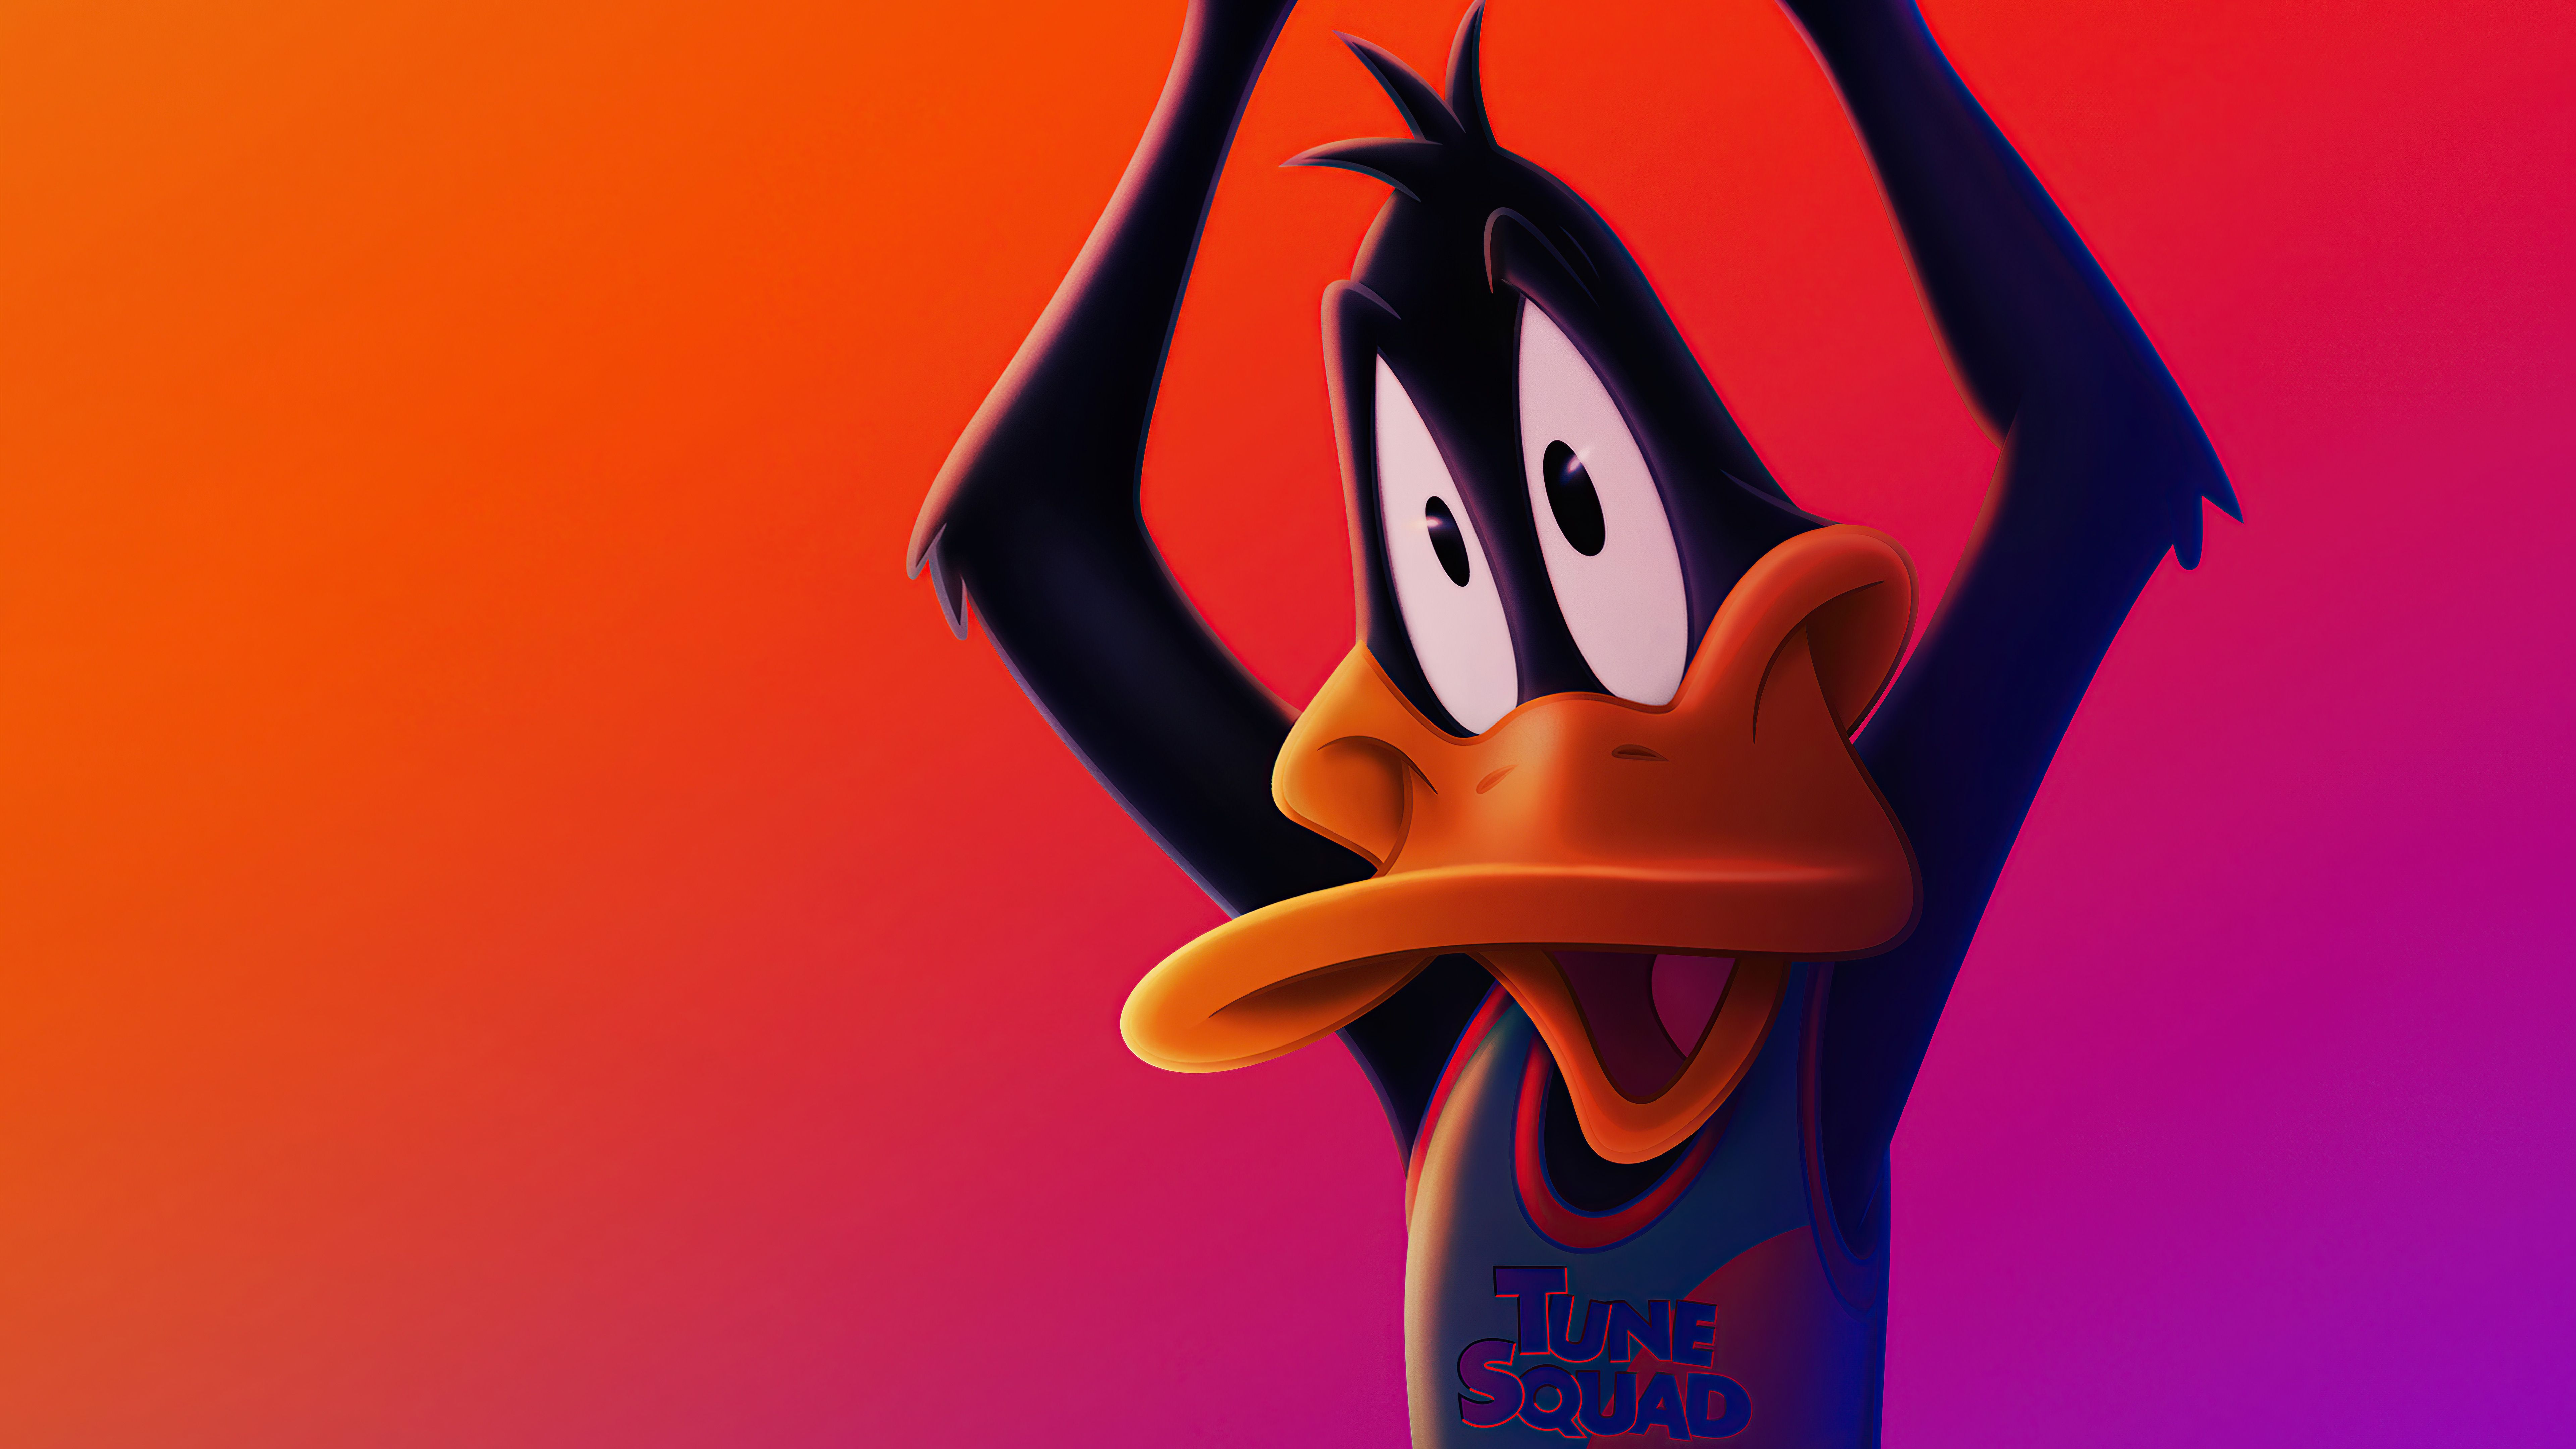 Wallpaper 4k Daffy Duck Space Jam A New Legacy 4k Daffy Duck Space Jam A New Legacy 4k wallpaper